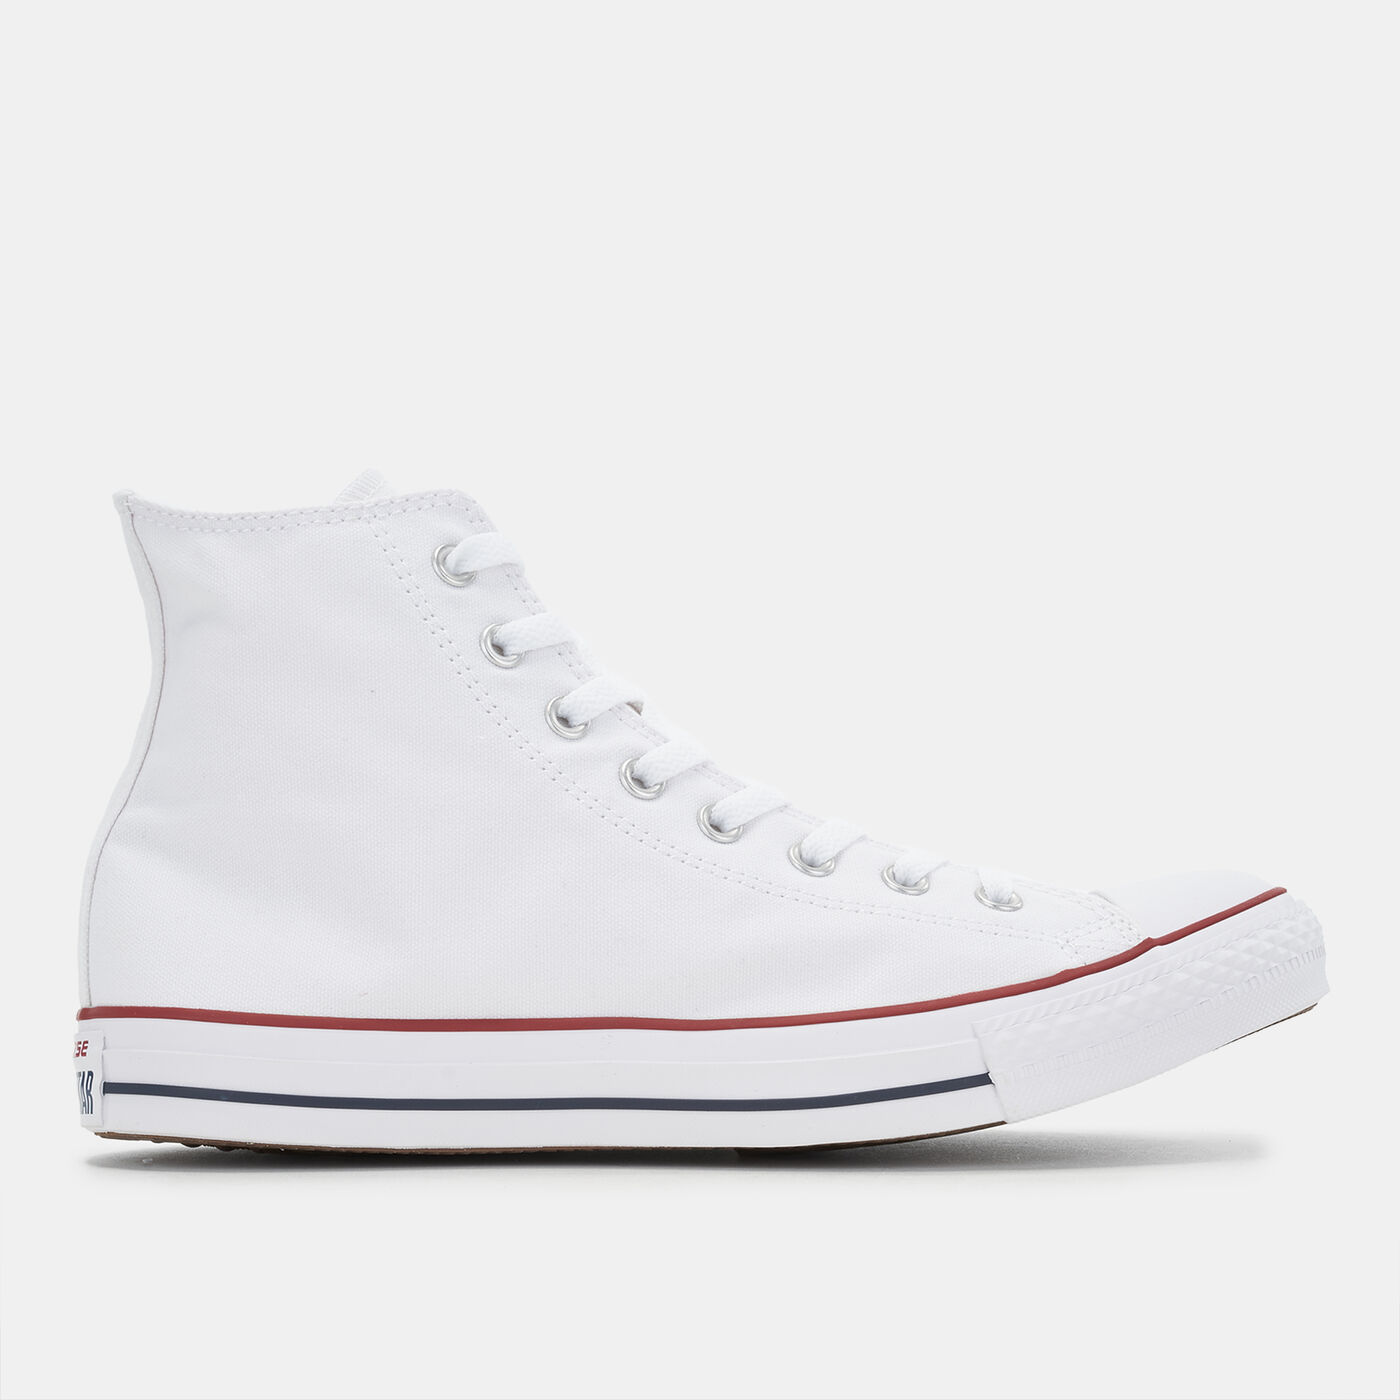 Chuck Taylor All Star Core High-Top Unisex Shoe